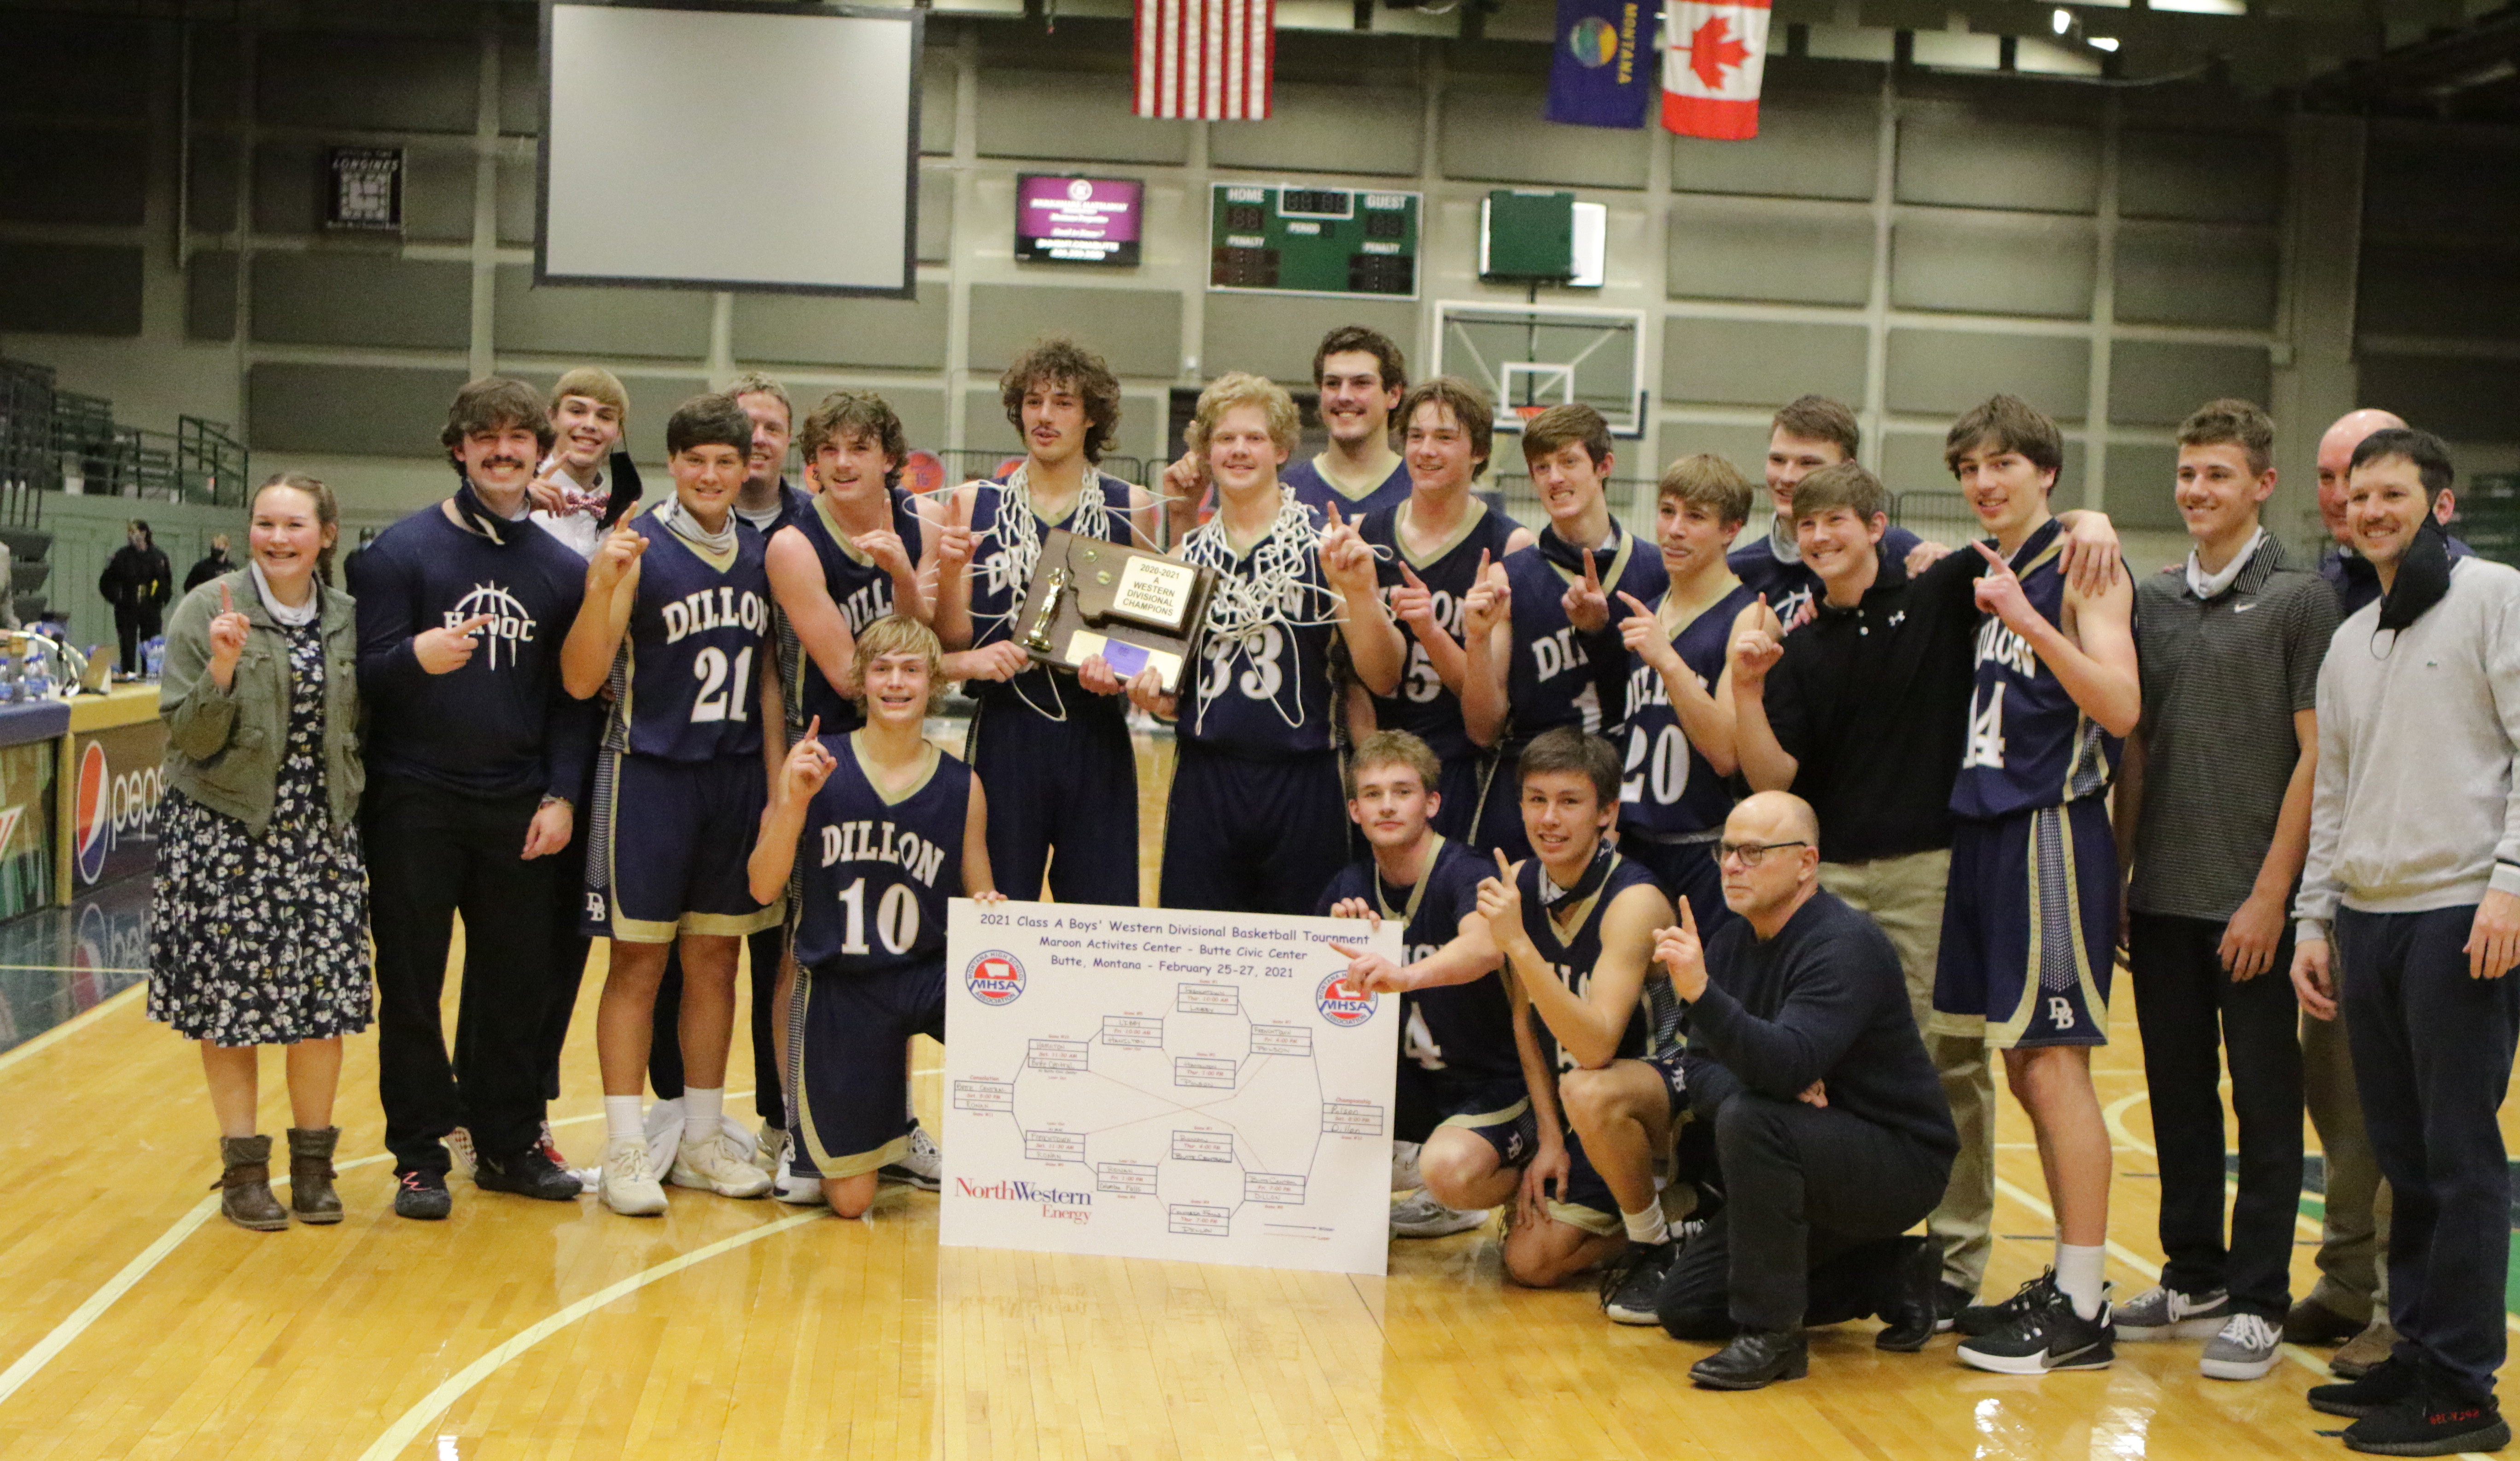 An image of the basketball team after winning the State Championship in 2015